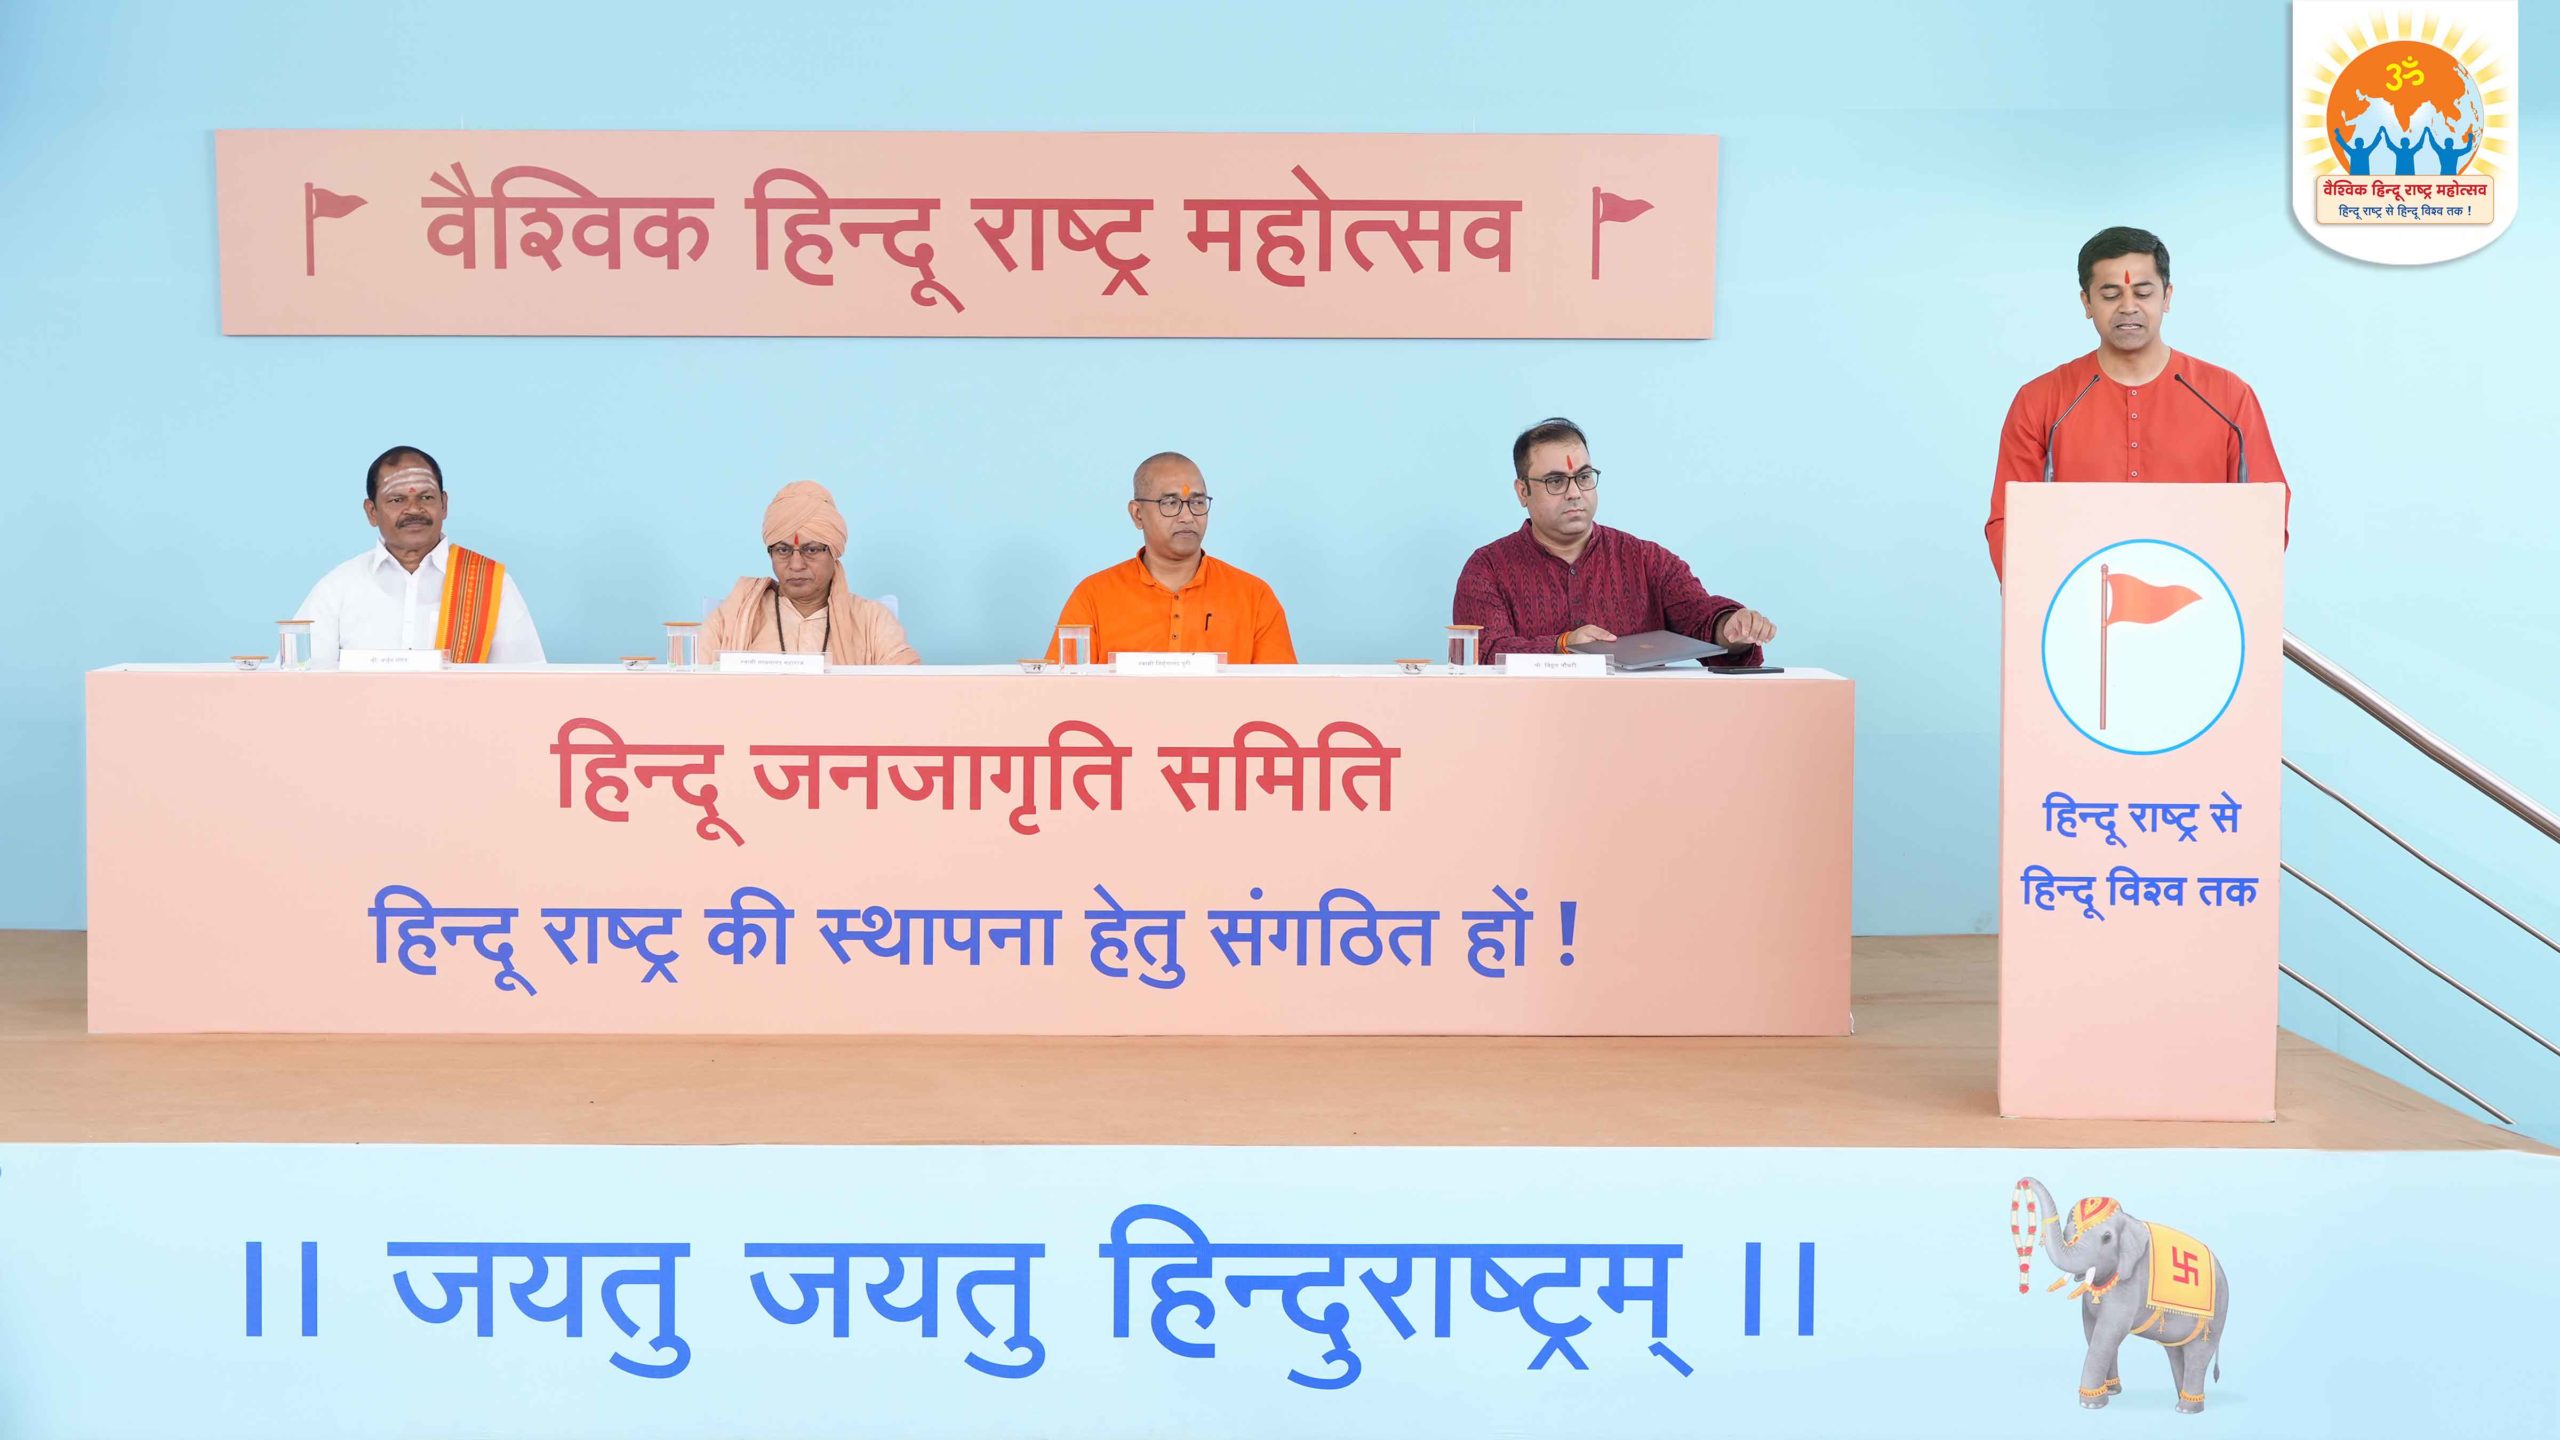 Devout Hindus participating in a session on - 'The plight of Hindus in various States of Hindusthan'